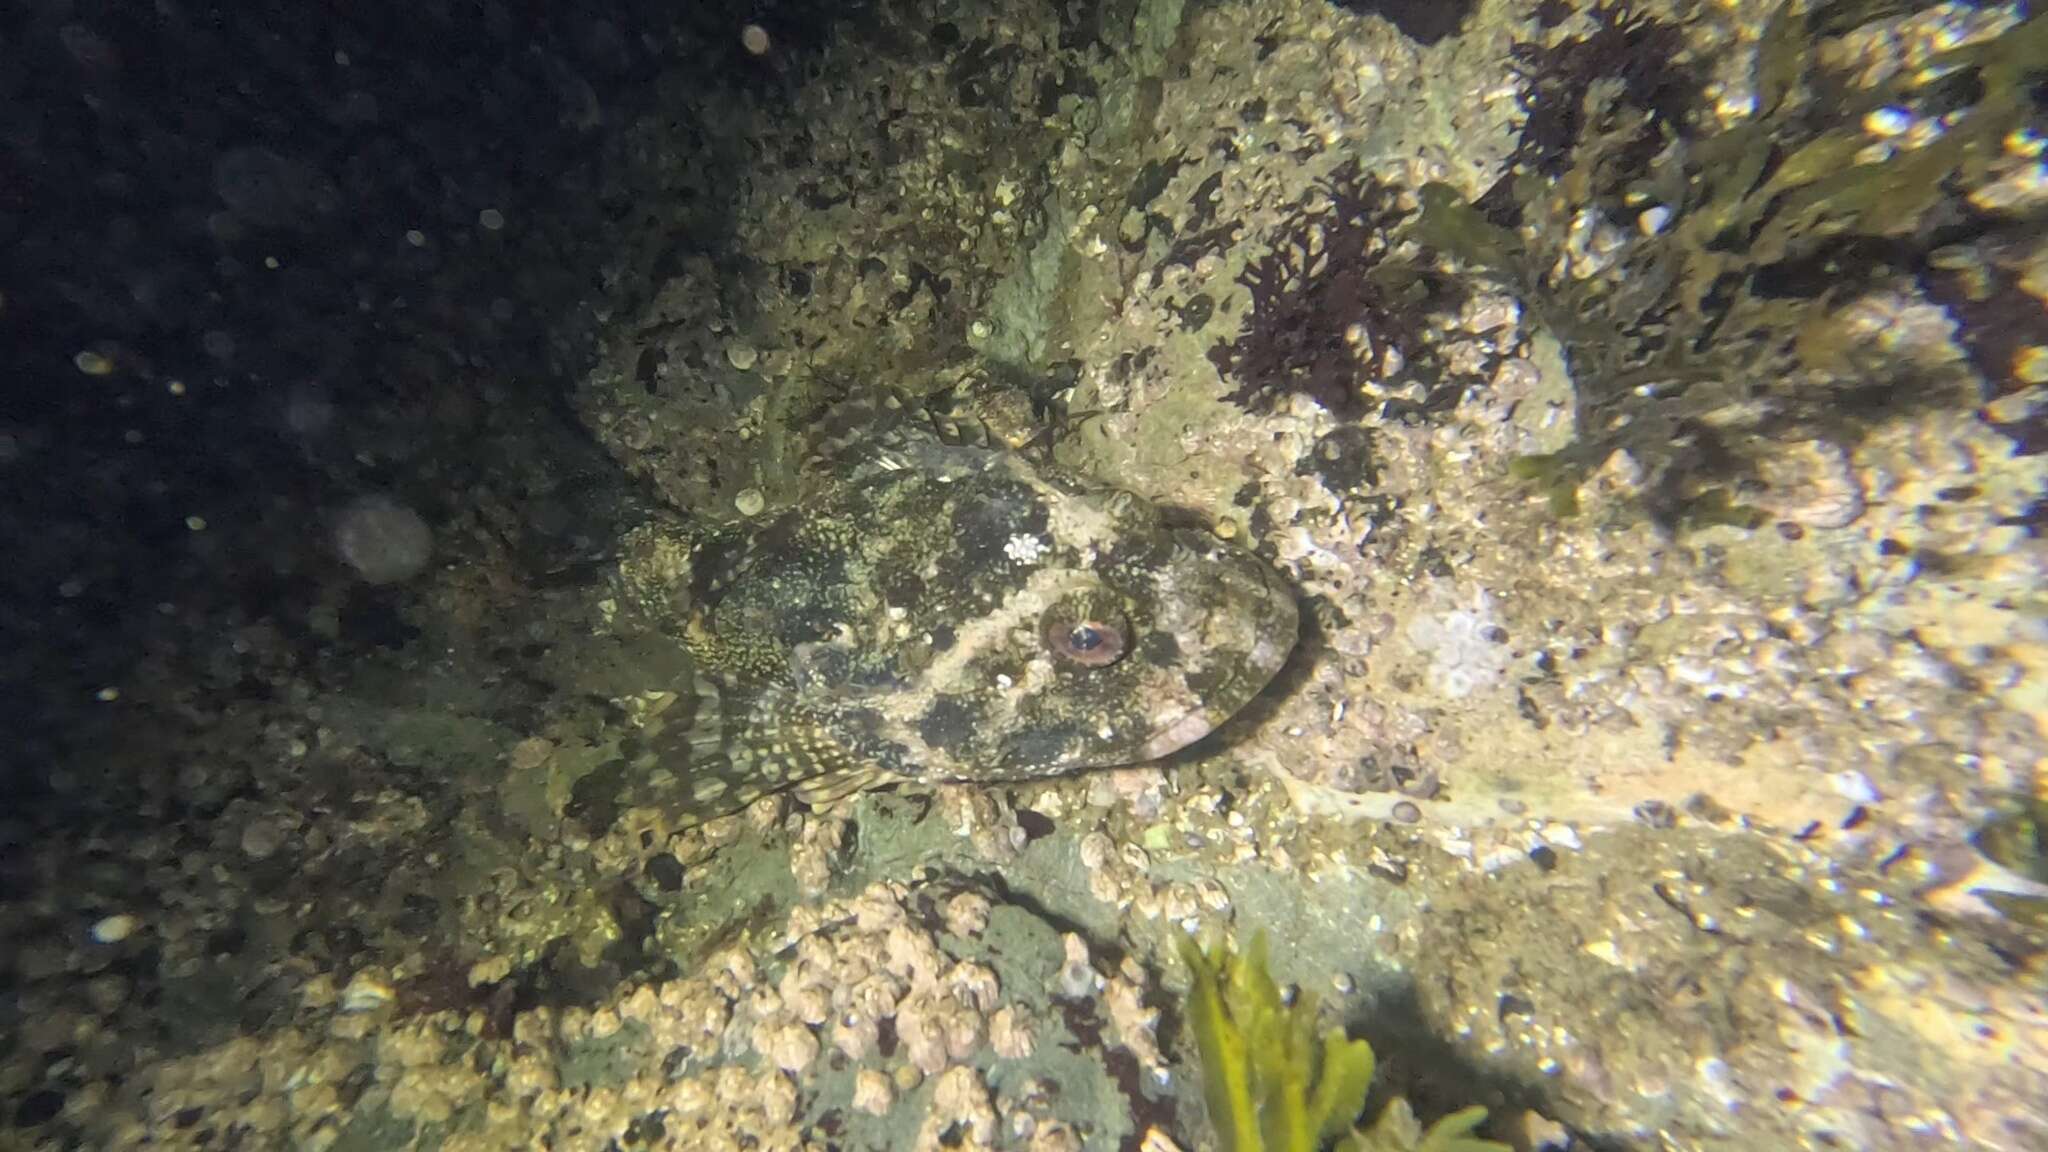 Image of Great sculpin